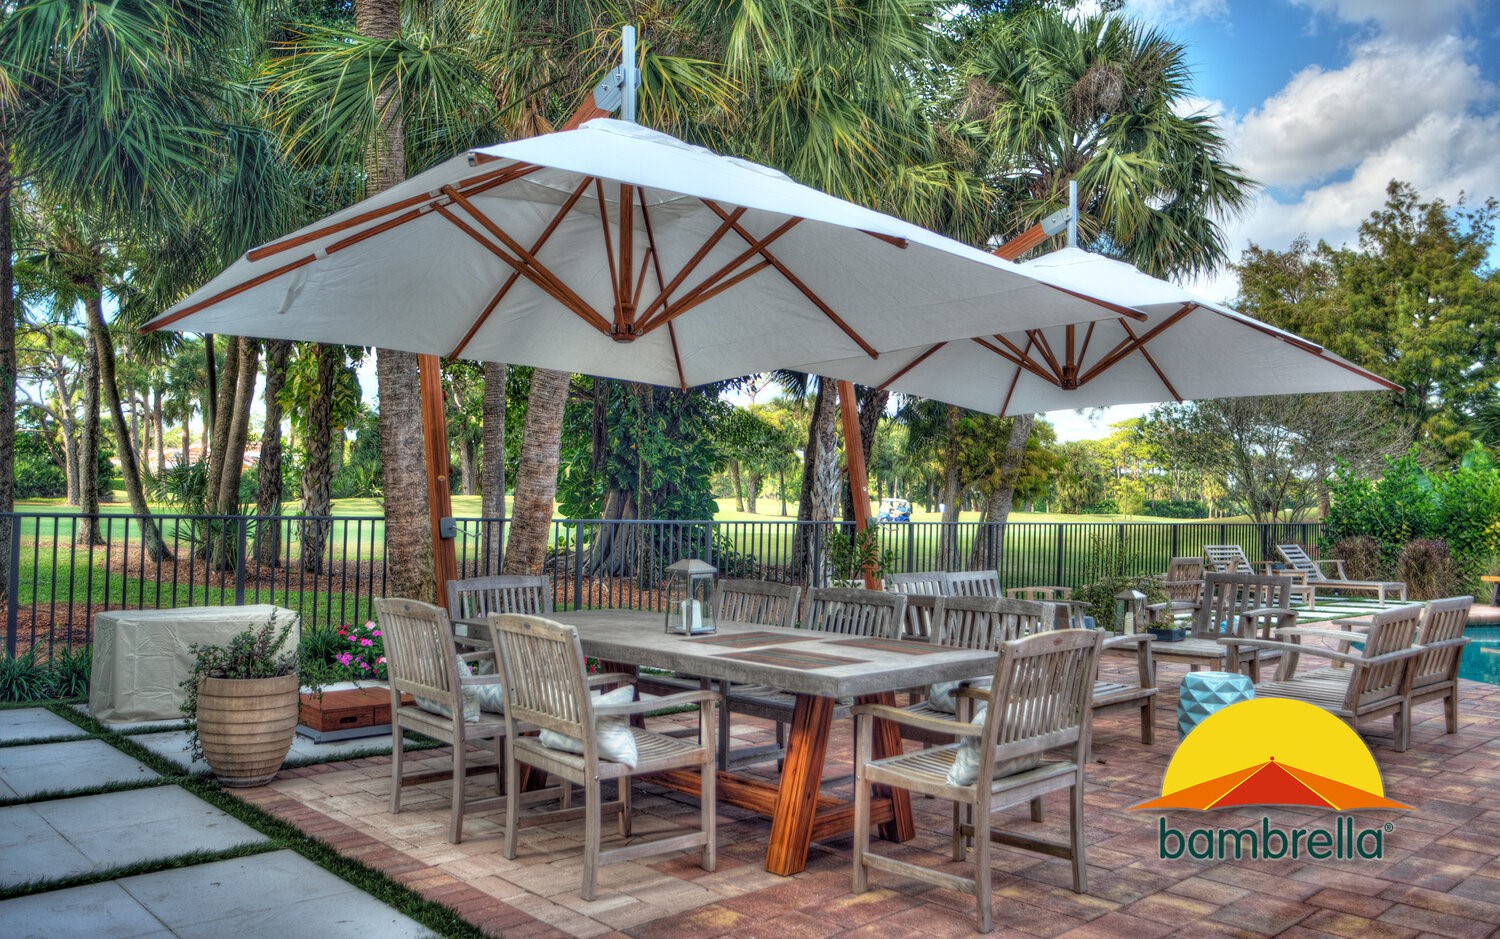 The Best 6 Patio Umbrellas For Tables, What Size Patio Umbrella For 6 Person Table